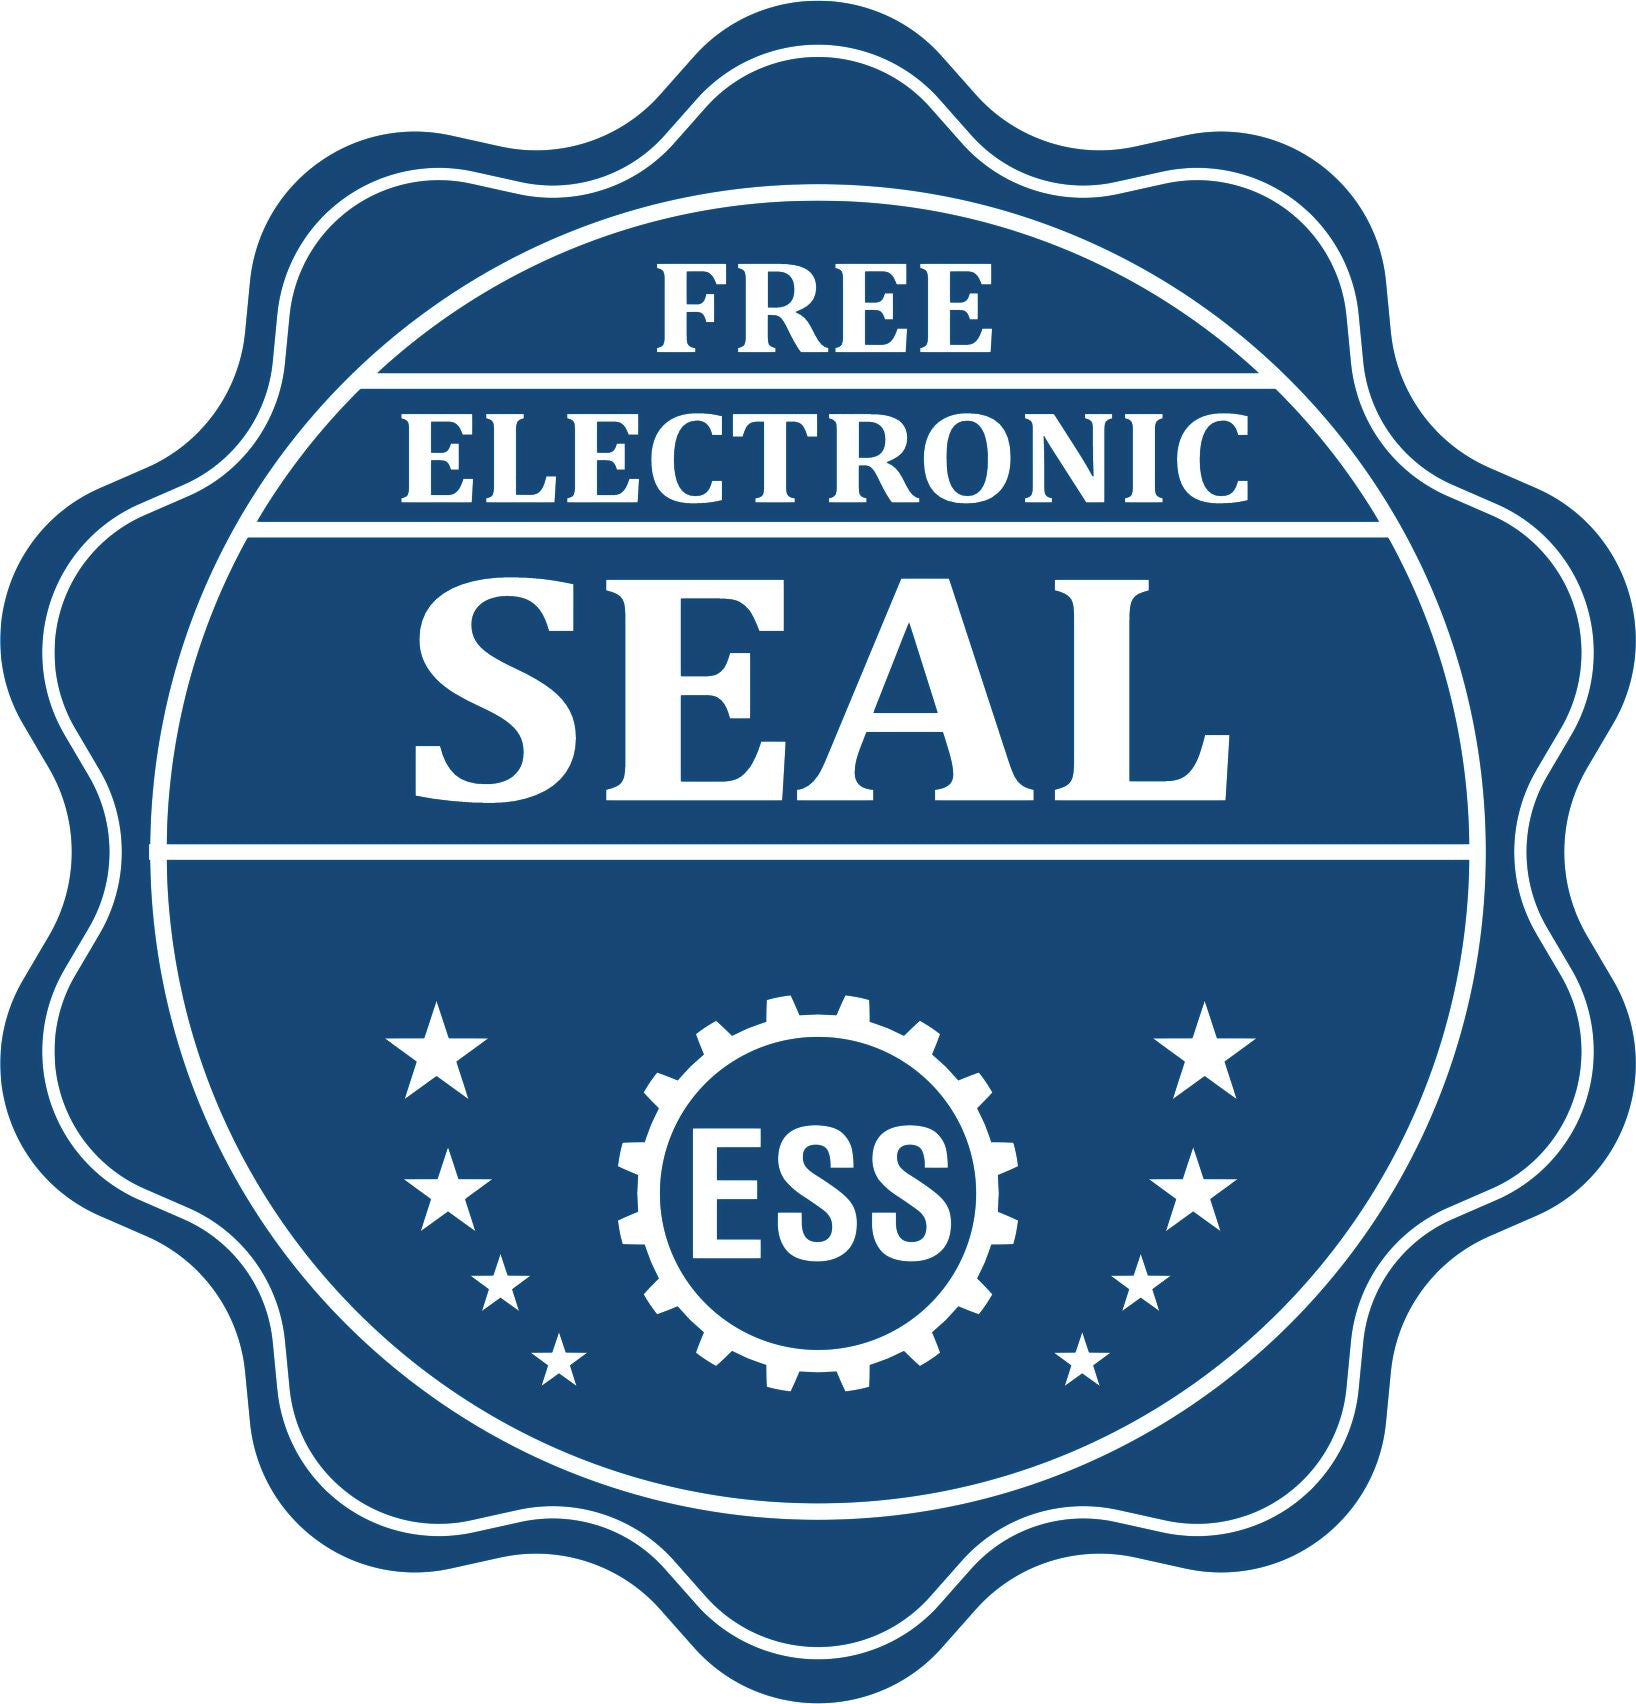 A badge showing a free electronic seal for the Extended Long Reach Louisiana Architect Seal Embosser with stars and the ESS gear on the emblem.